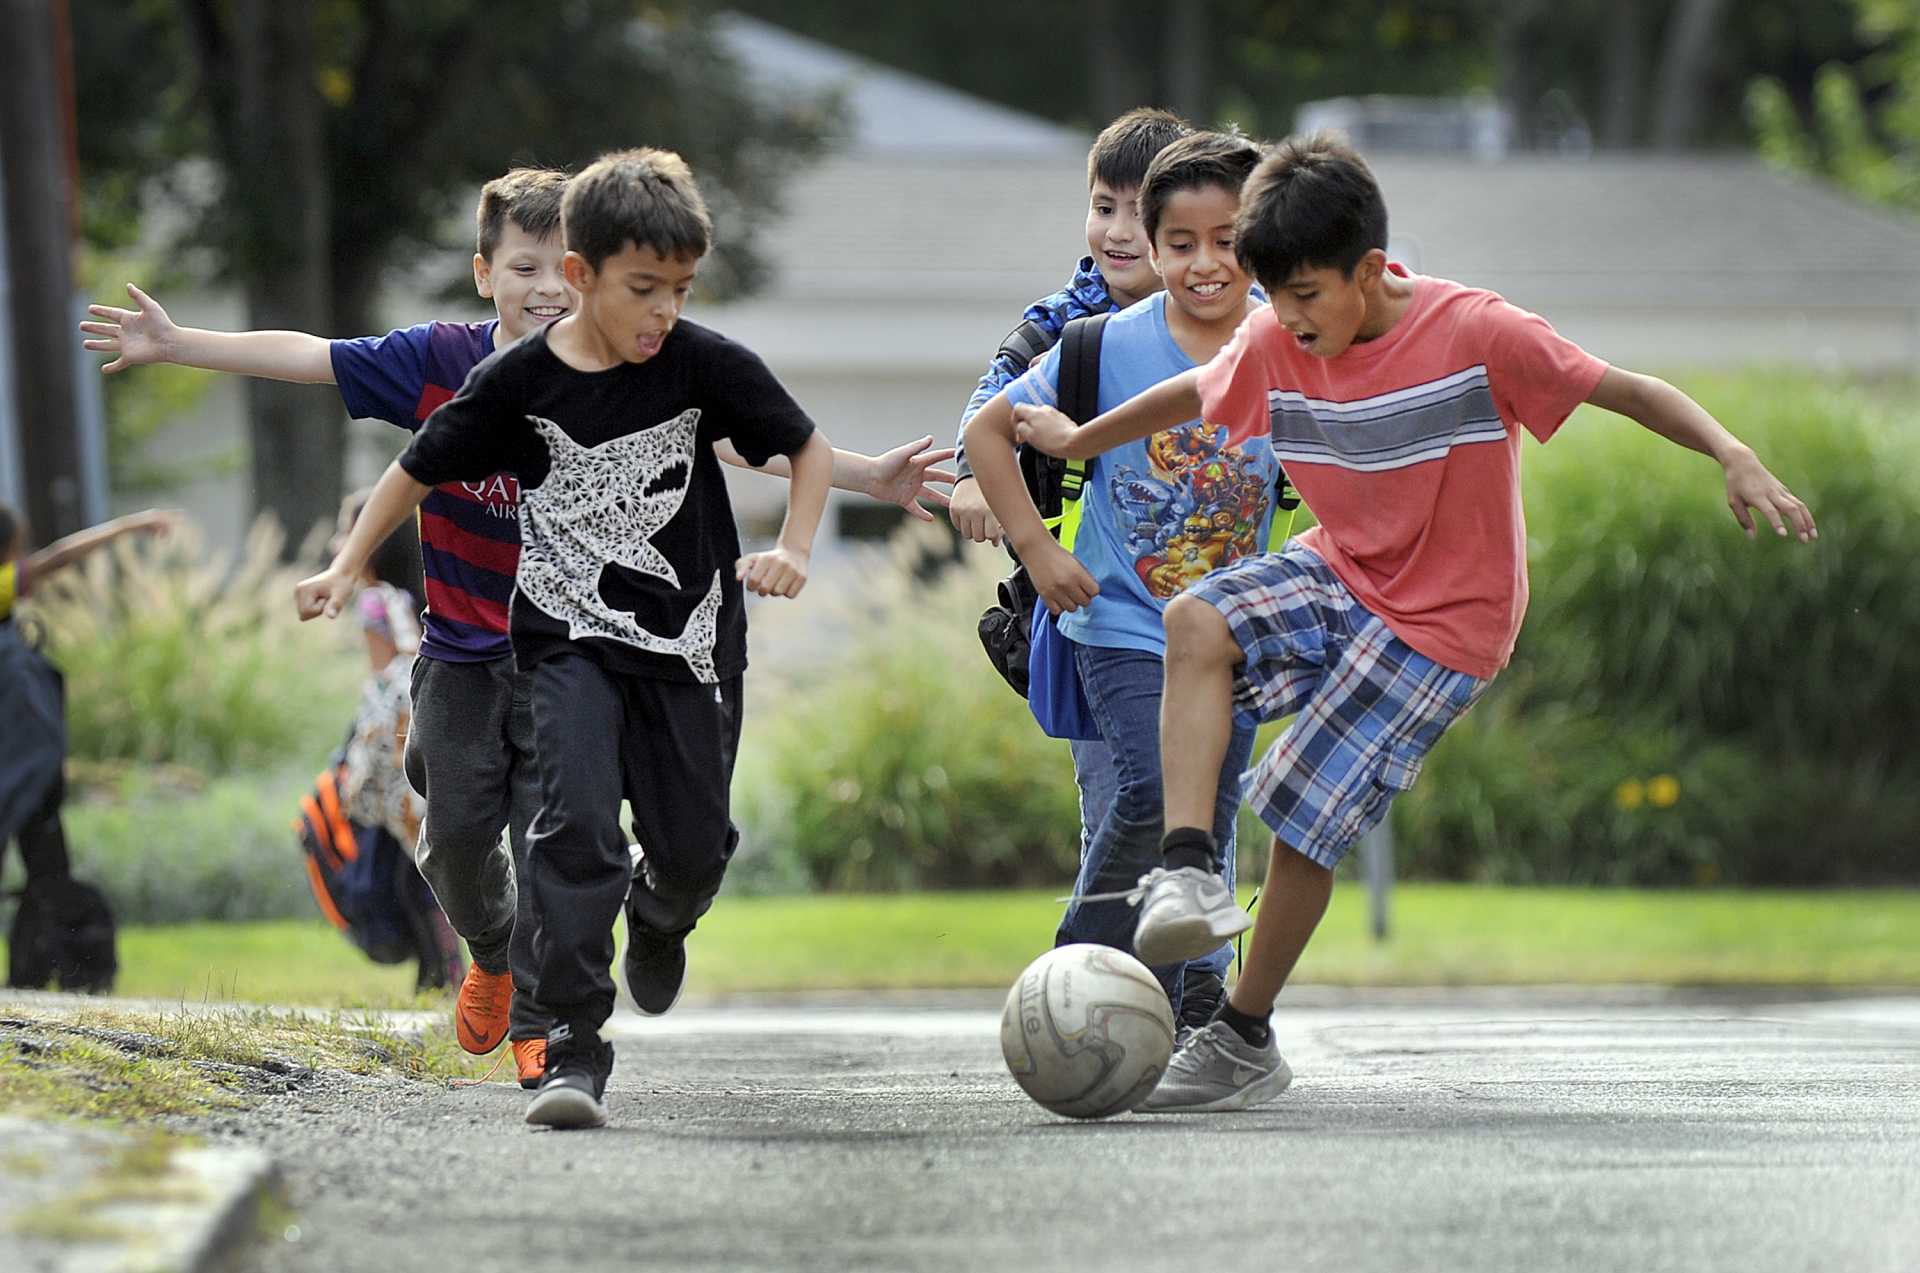 These kids say they play soccer ''all the time,'' every chance they get - including this day, on the way home from school. 